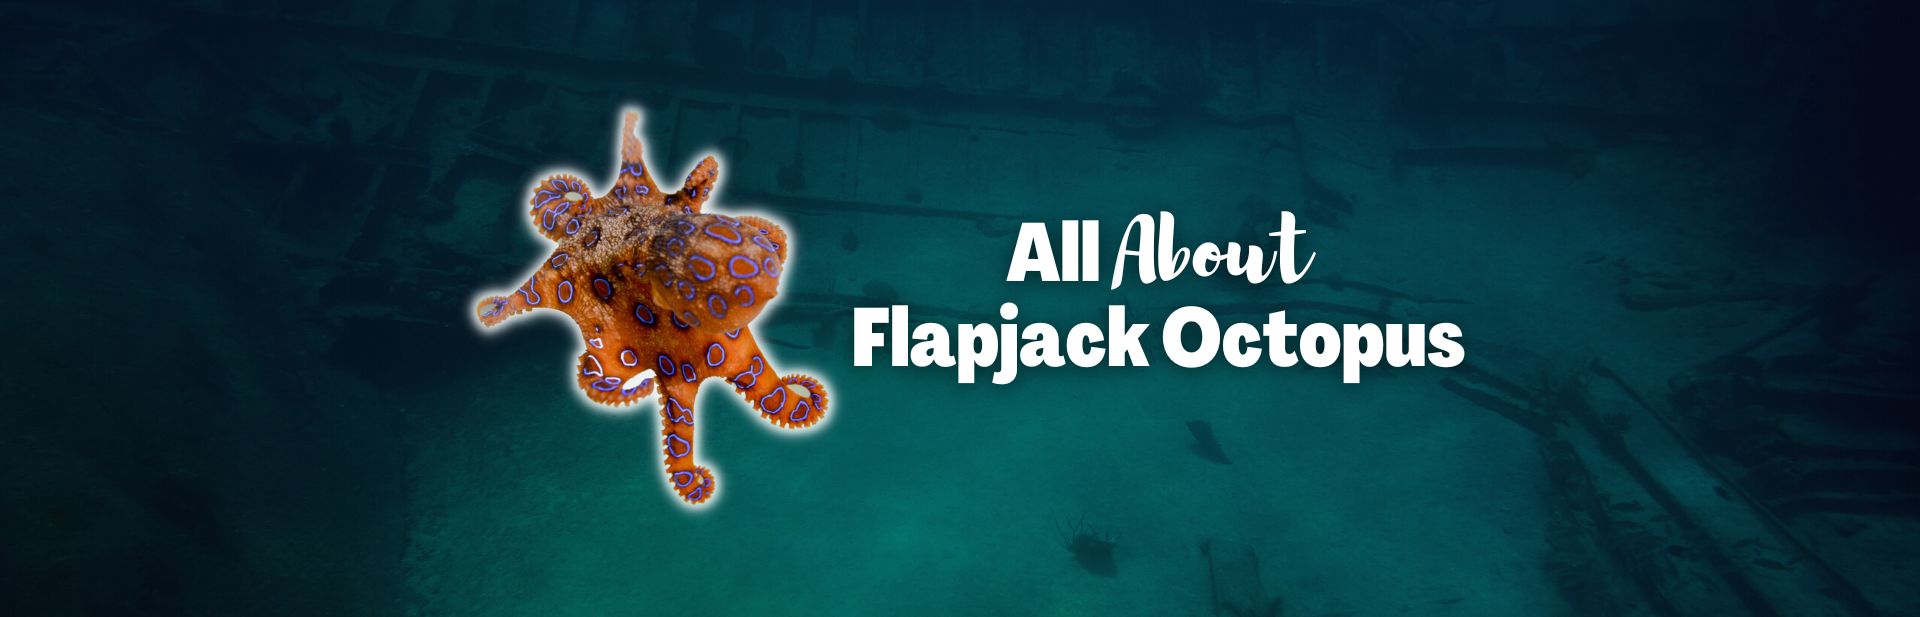 Flapjack Octopus: All About the Cutest Octopus In the Ocean